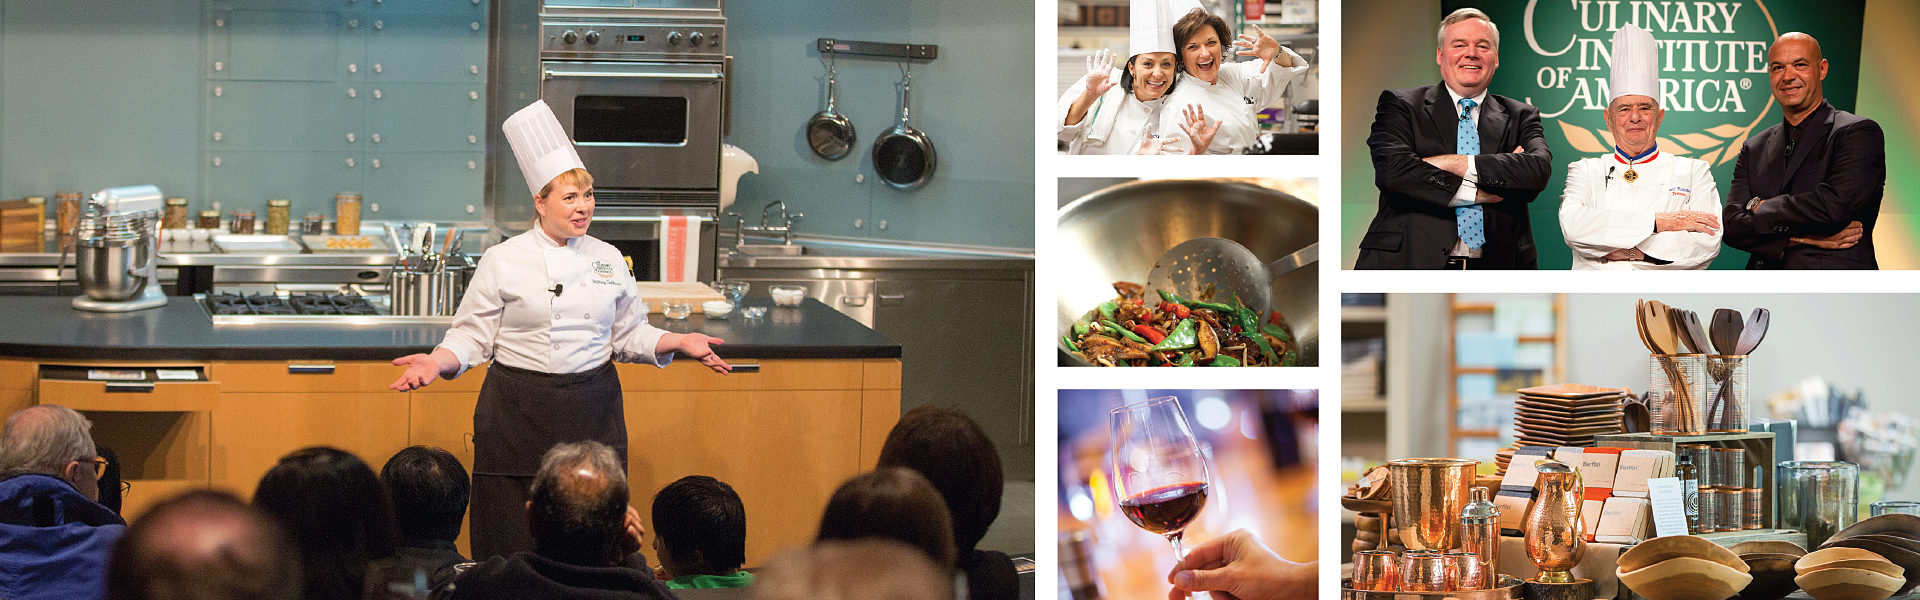 Photo collage of activities at the Culinary Institute of America.